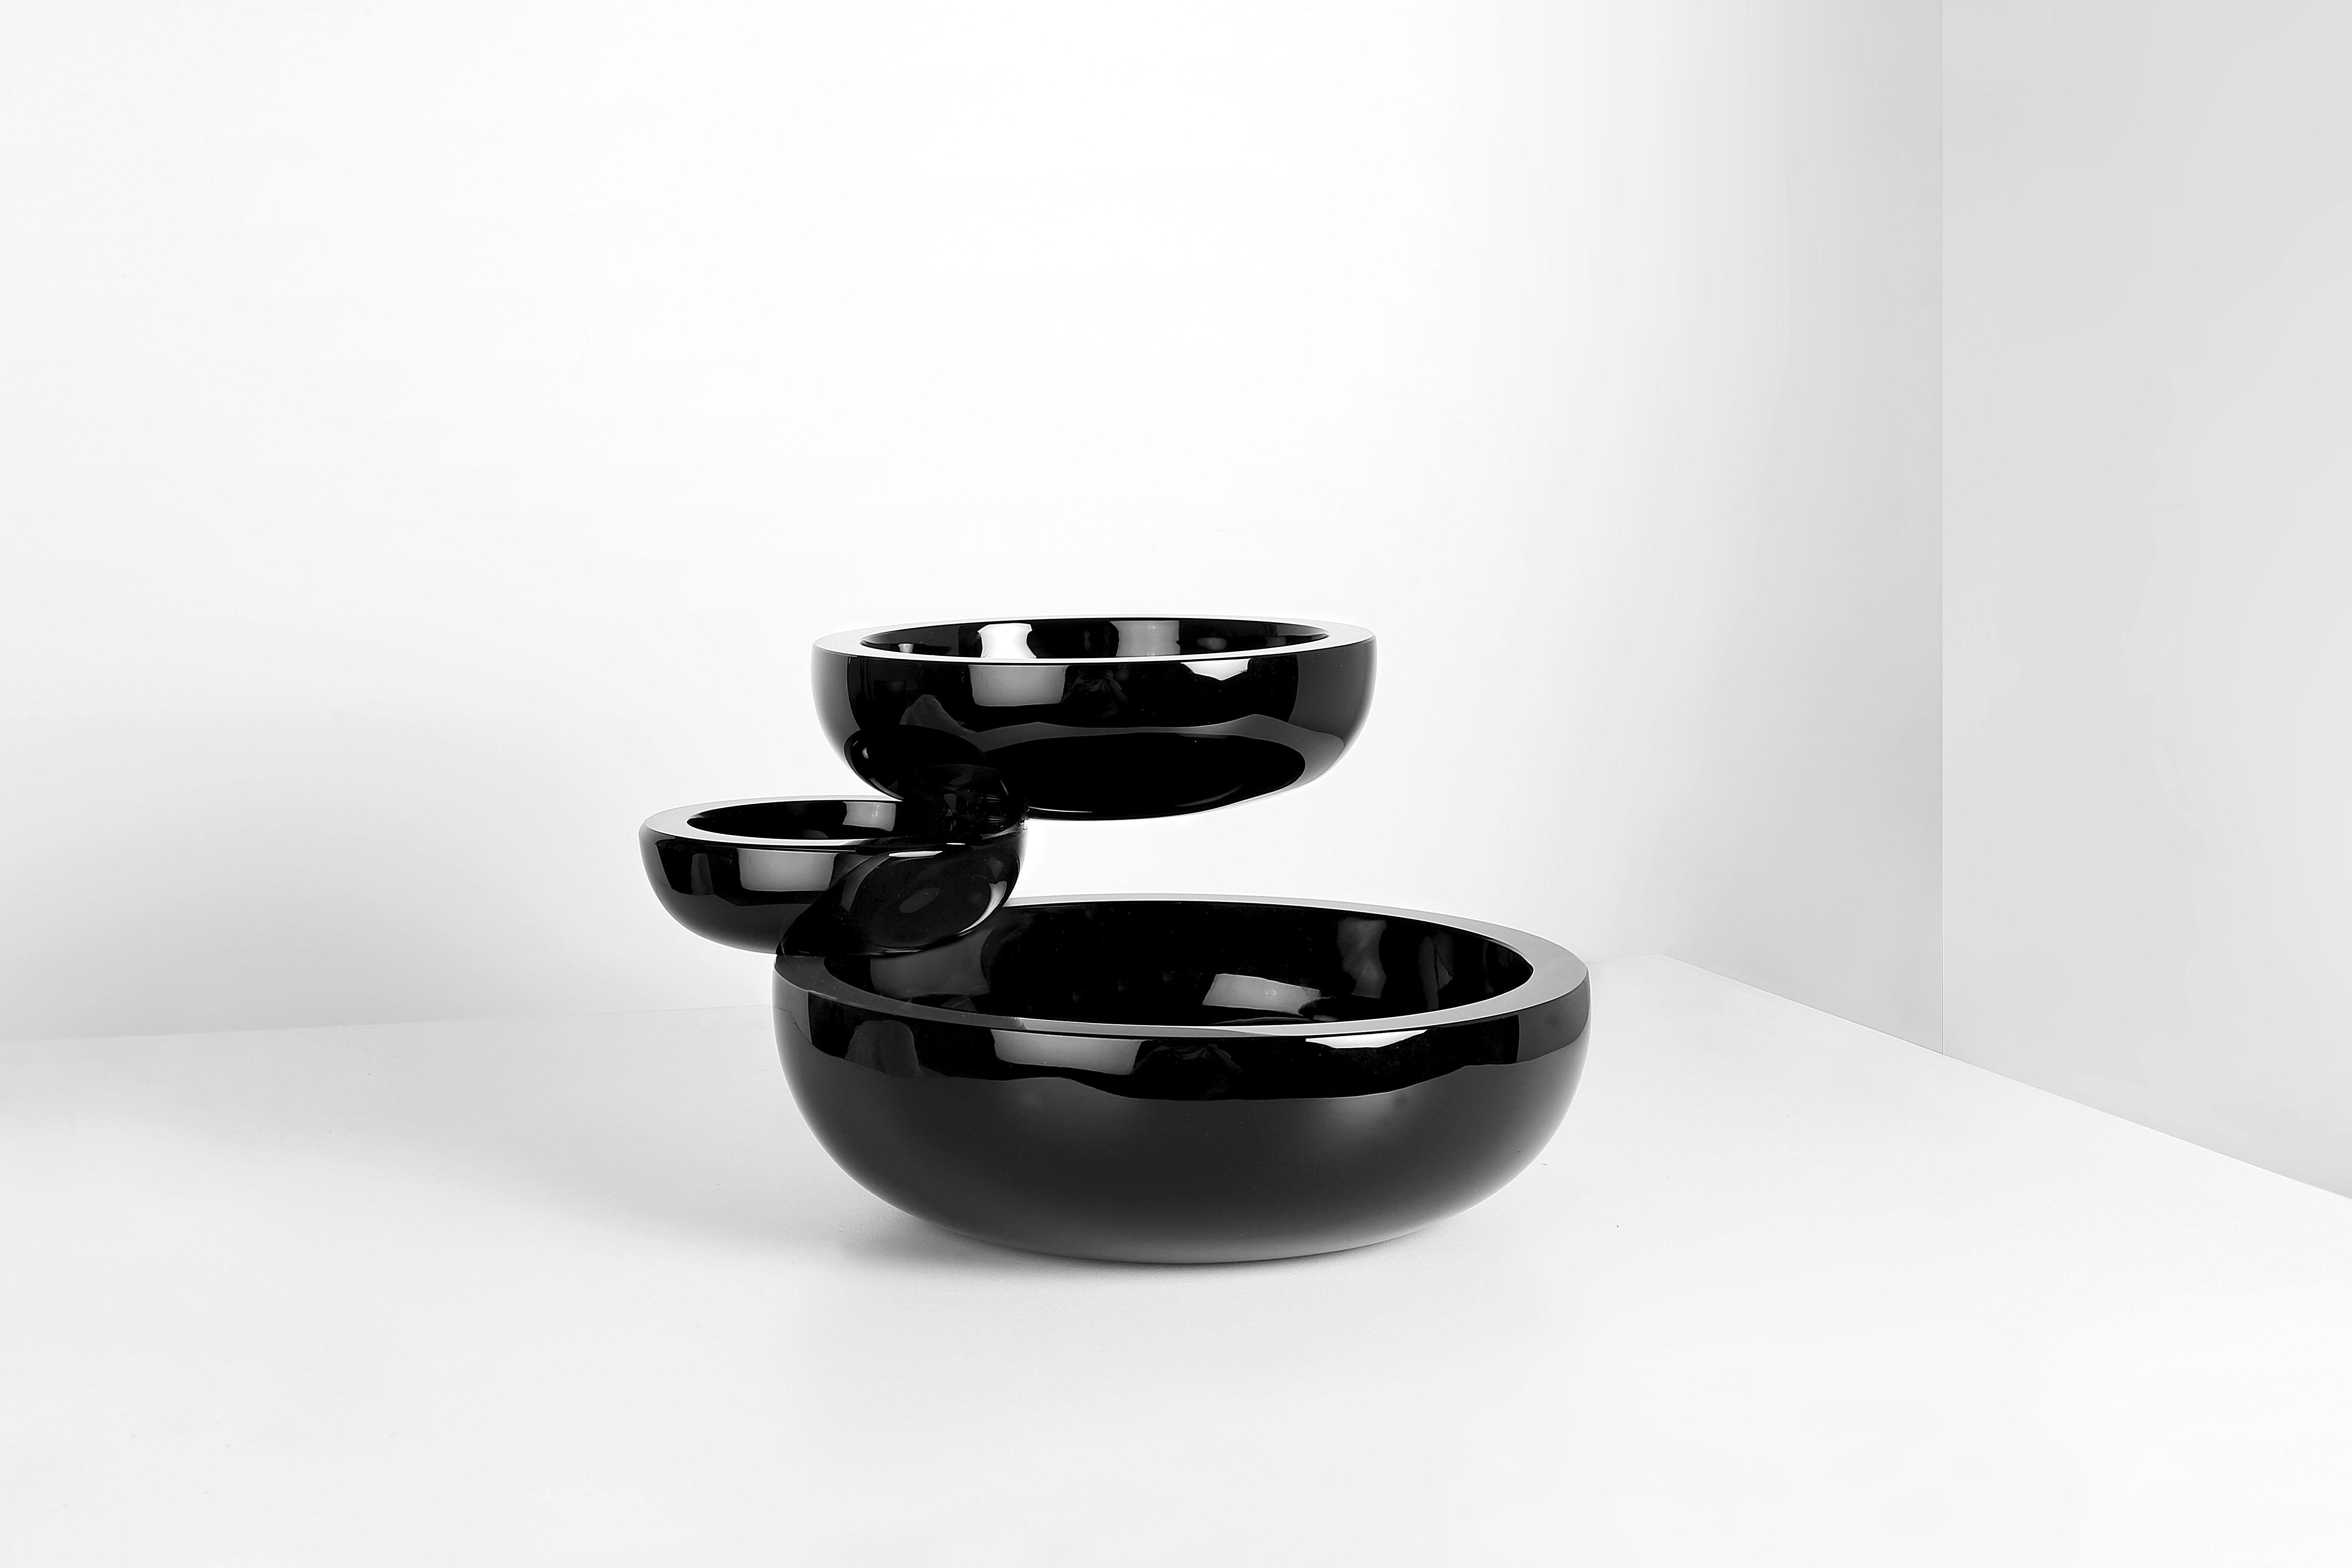 Balancing Obsidian Sculptural Bowl from the Balance Collection by Joel Escalona For Sale 2